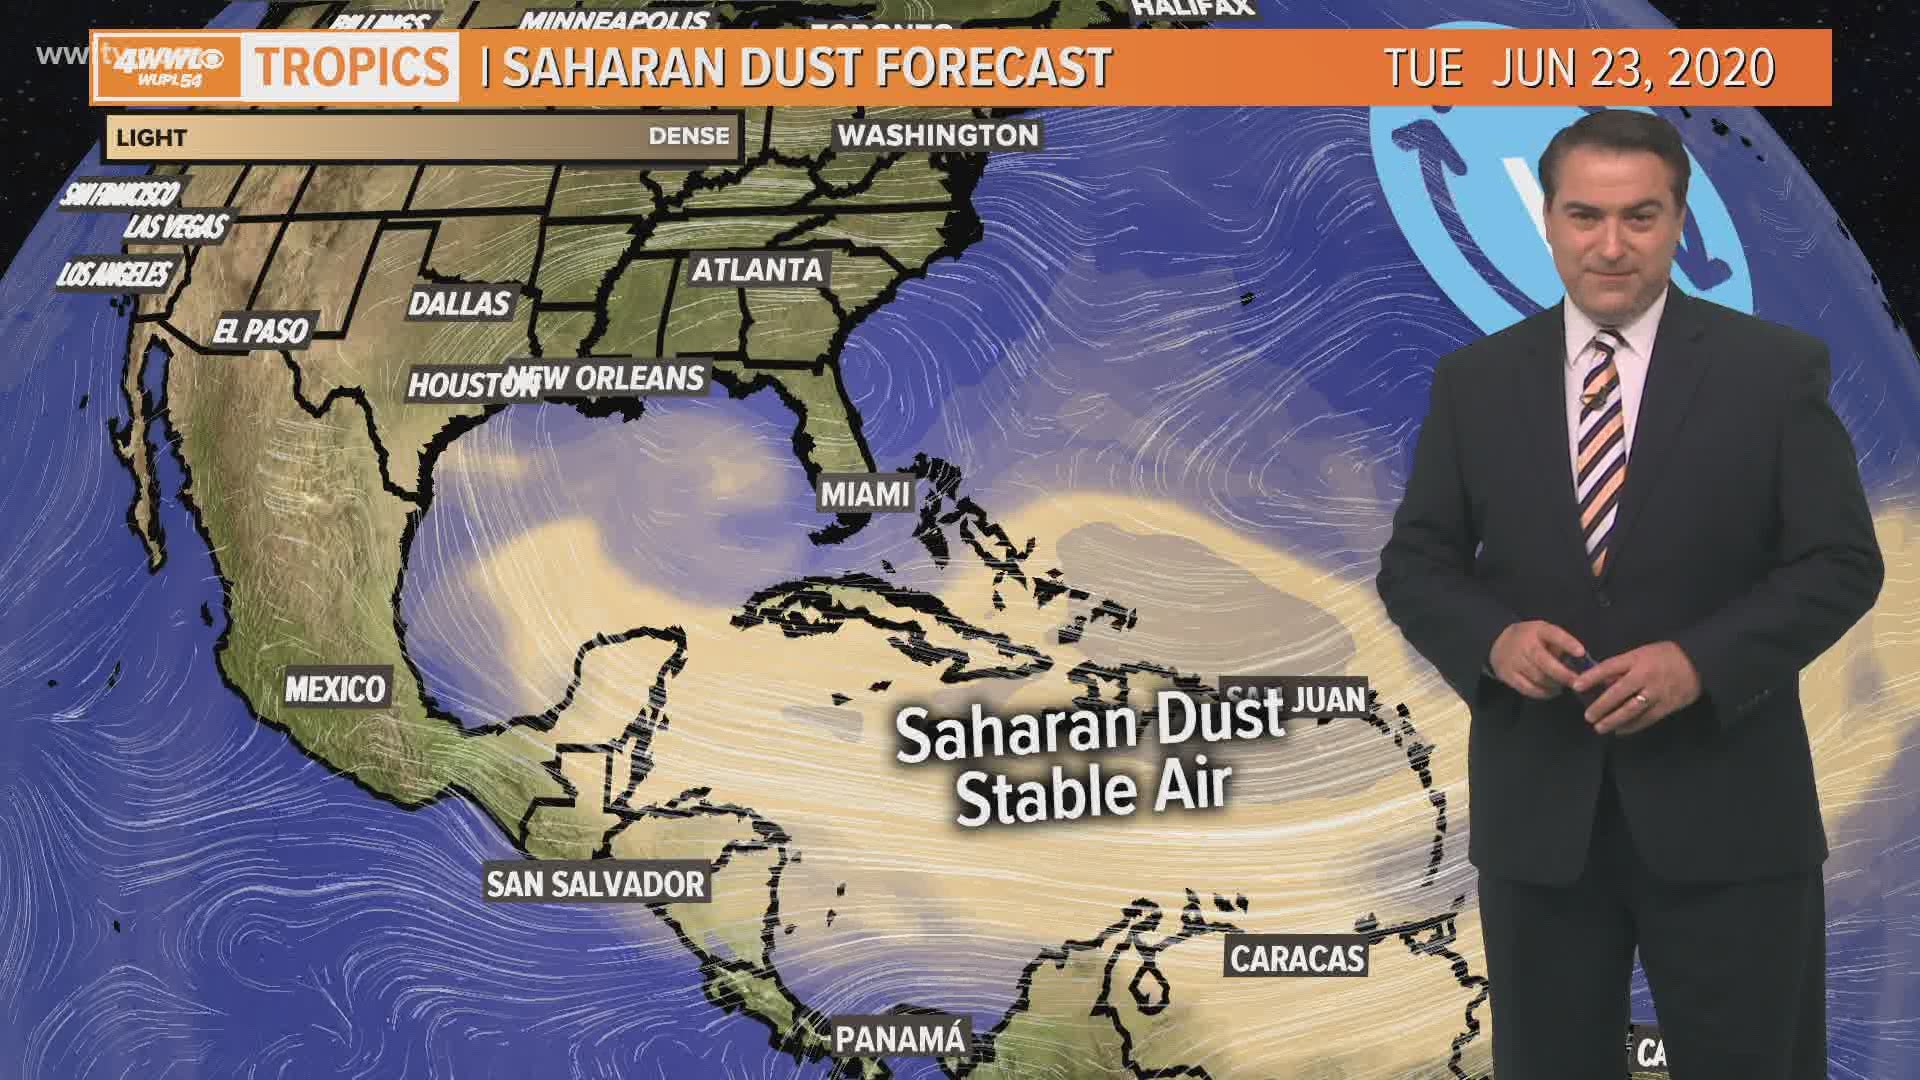 The tropics remain quiet. Saharan Dust heads toward the U.S. by next week and this will keep the tropics quiet.